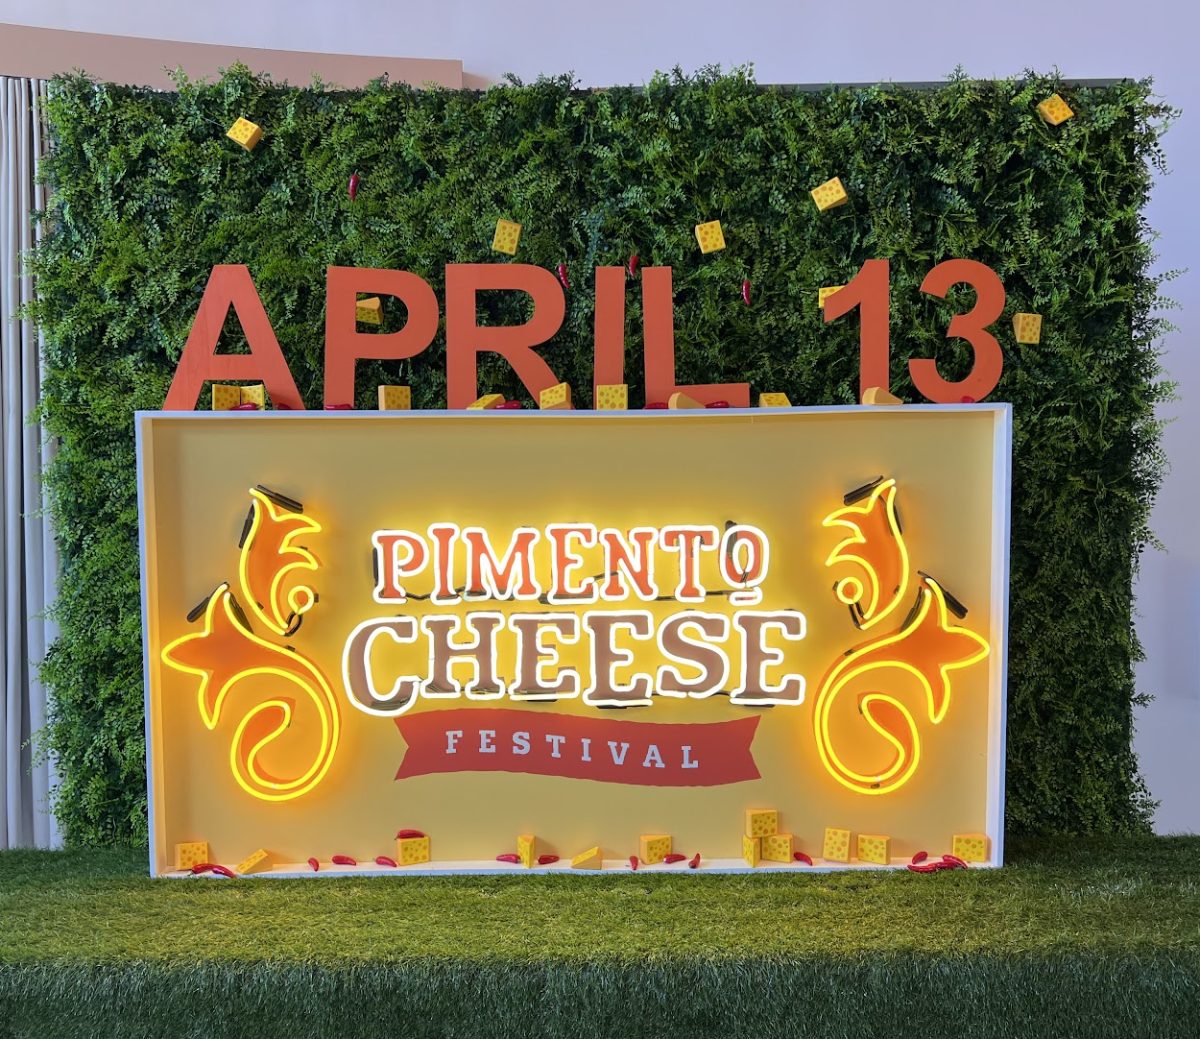 The pimento cheese festival was held at Downtown Cary Park on April 13.